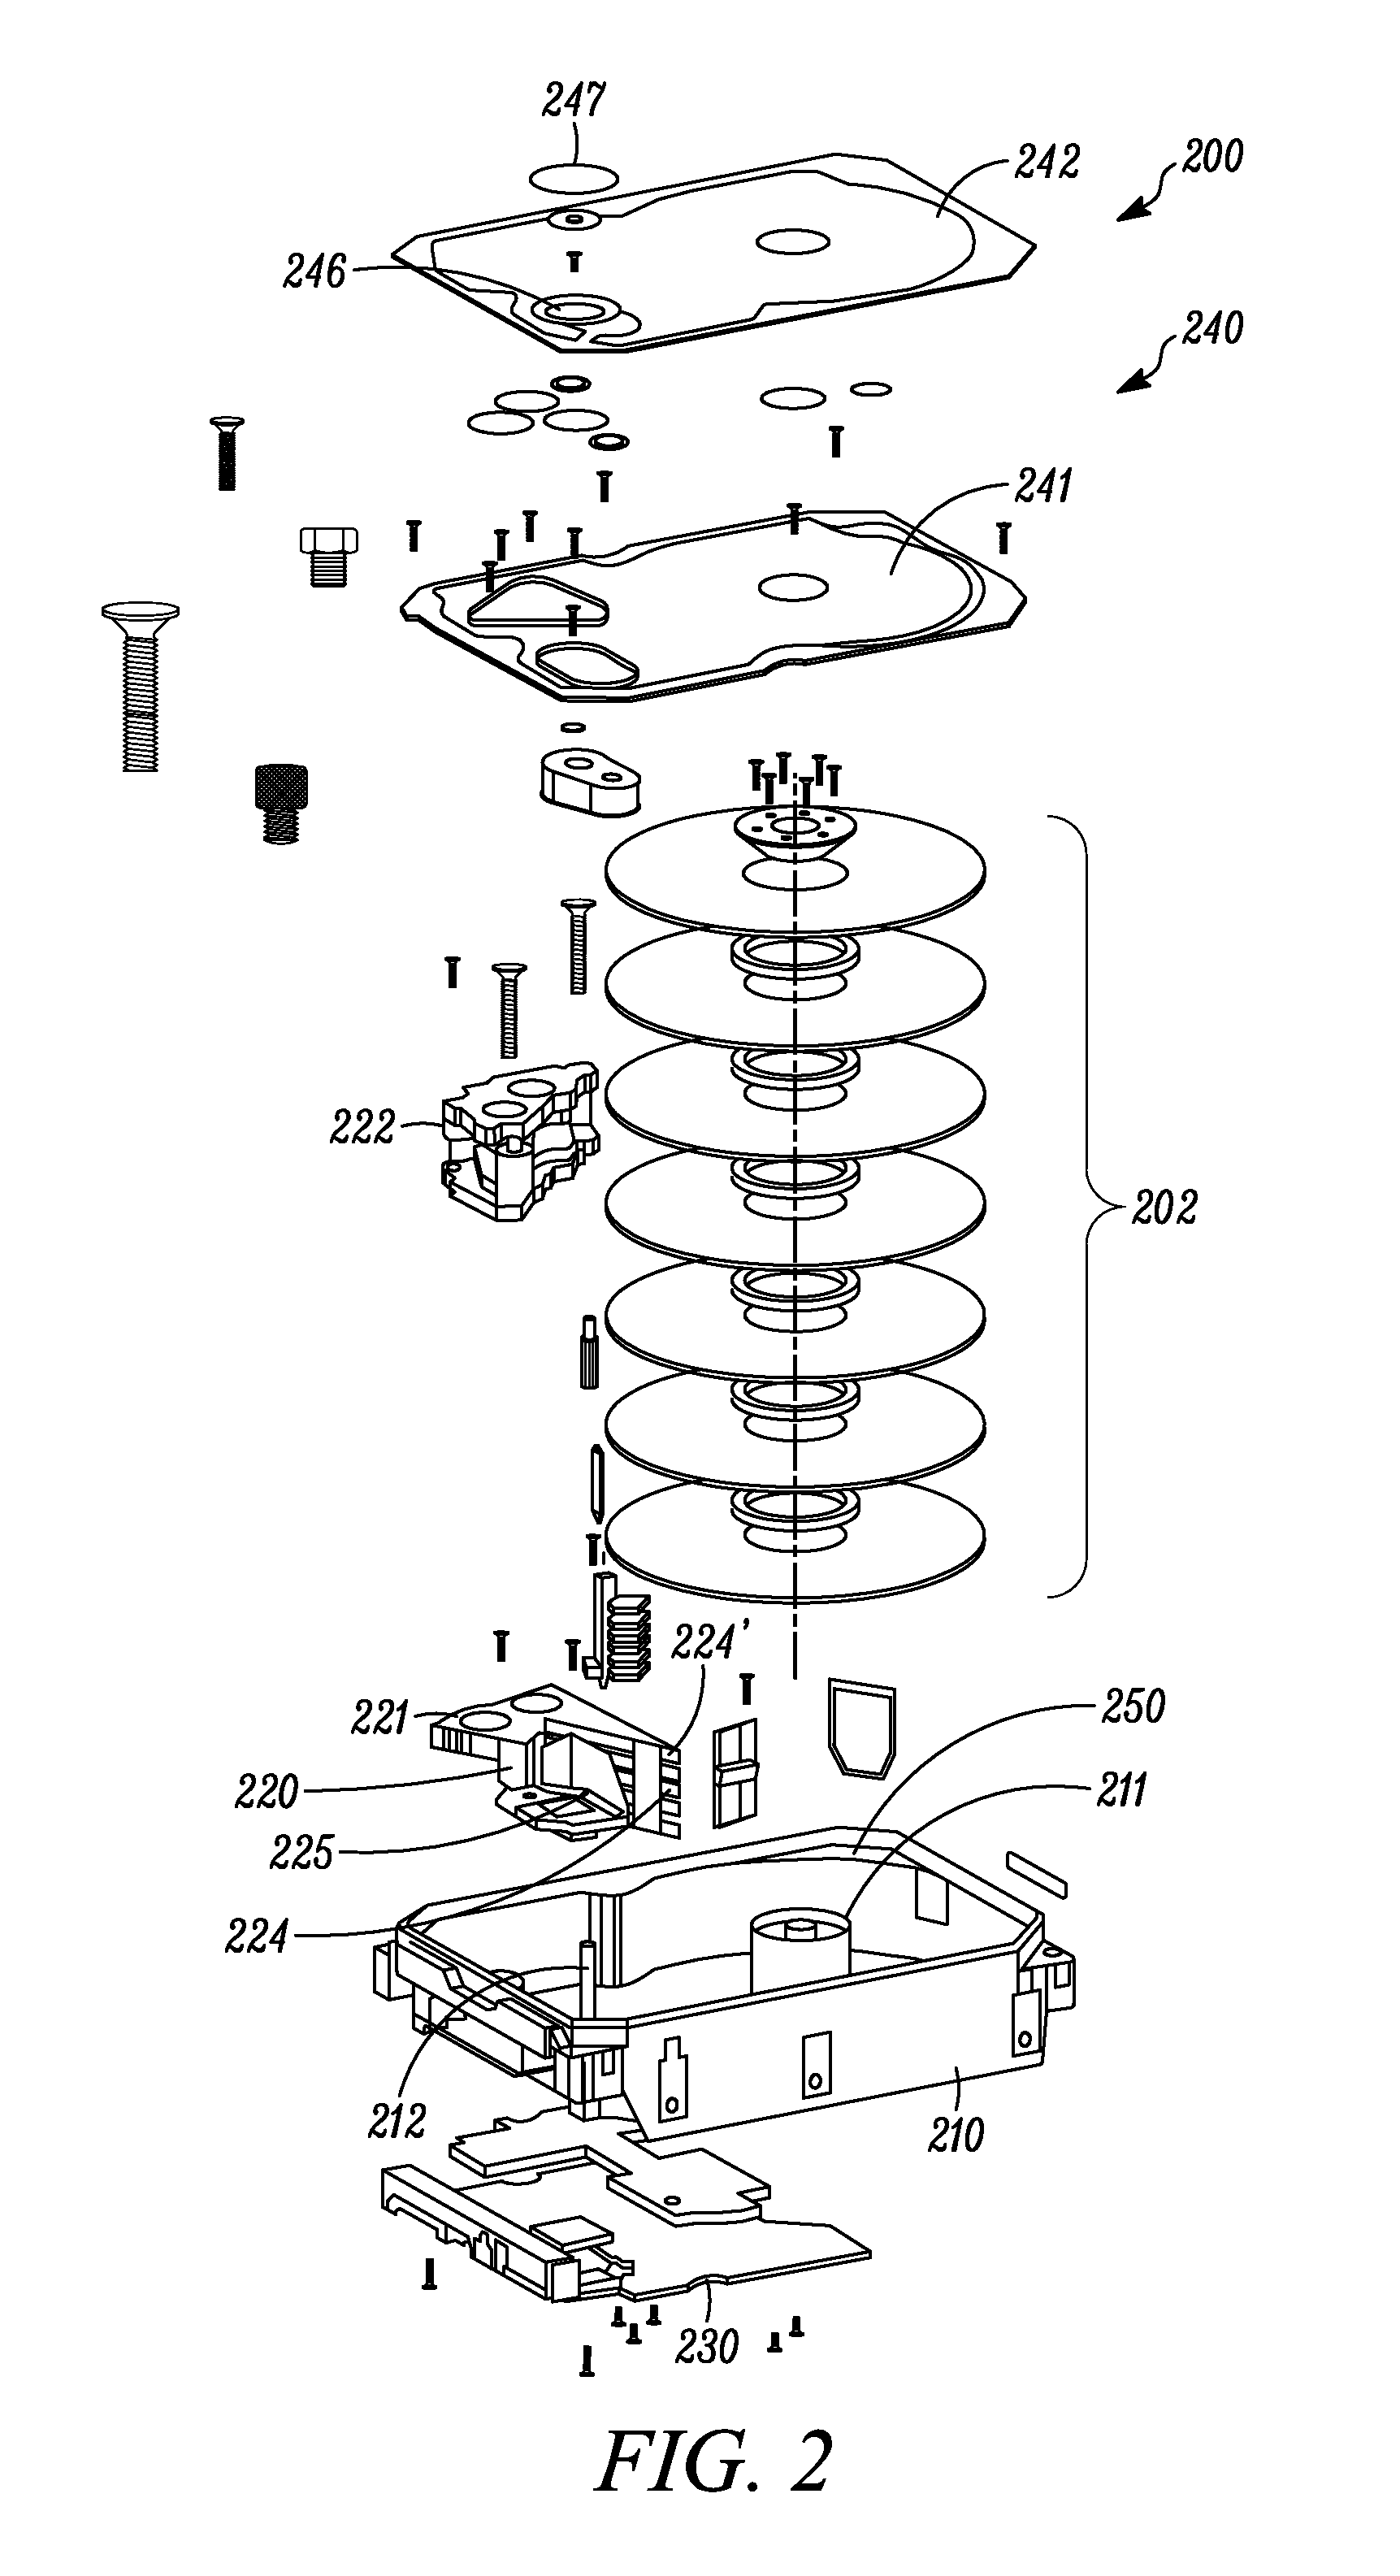 Method and apparatus for prevention of Fe contamination with oxygen mixture in a hard disk drive